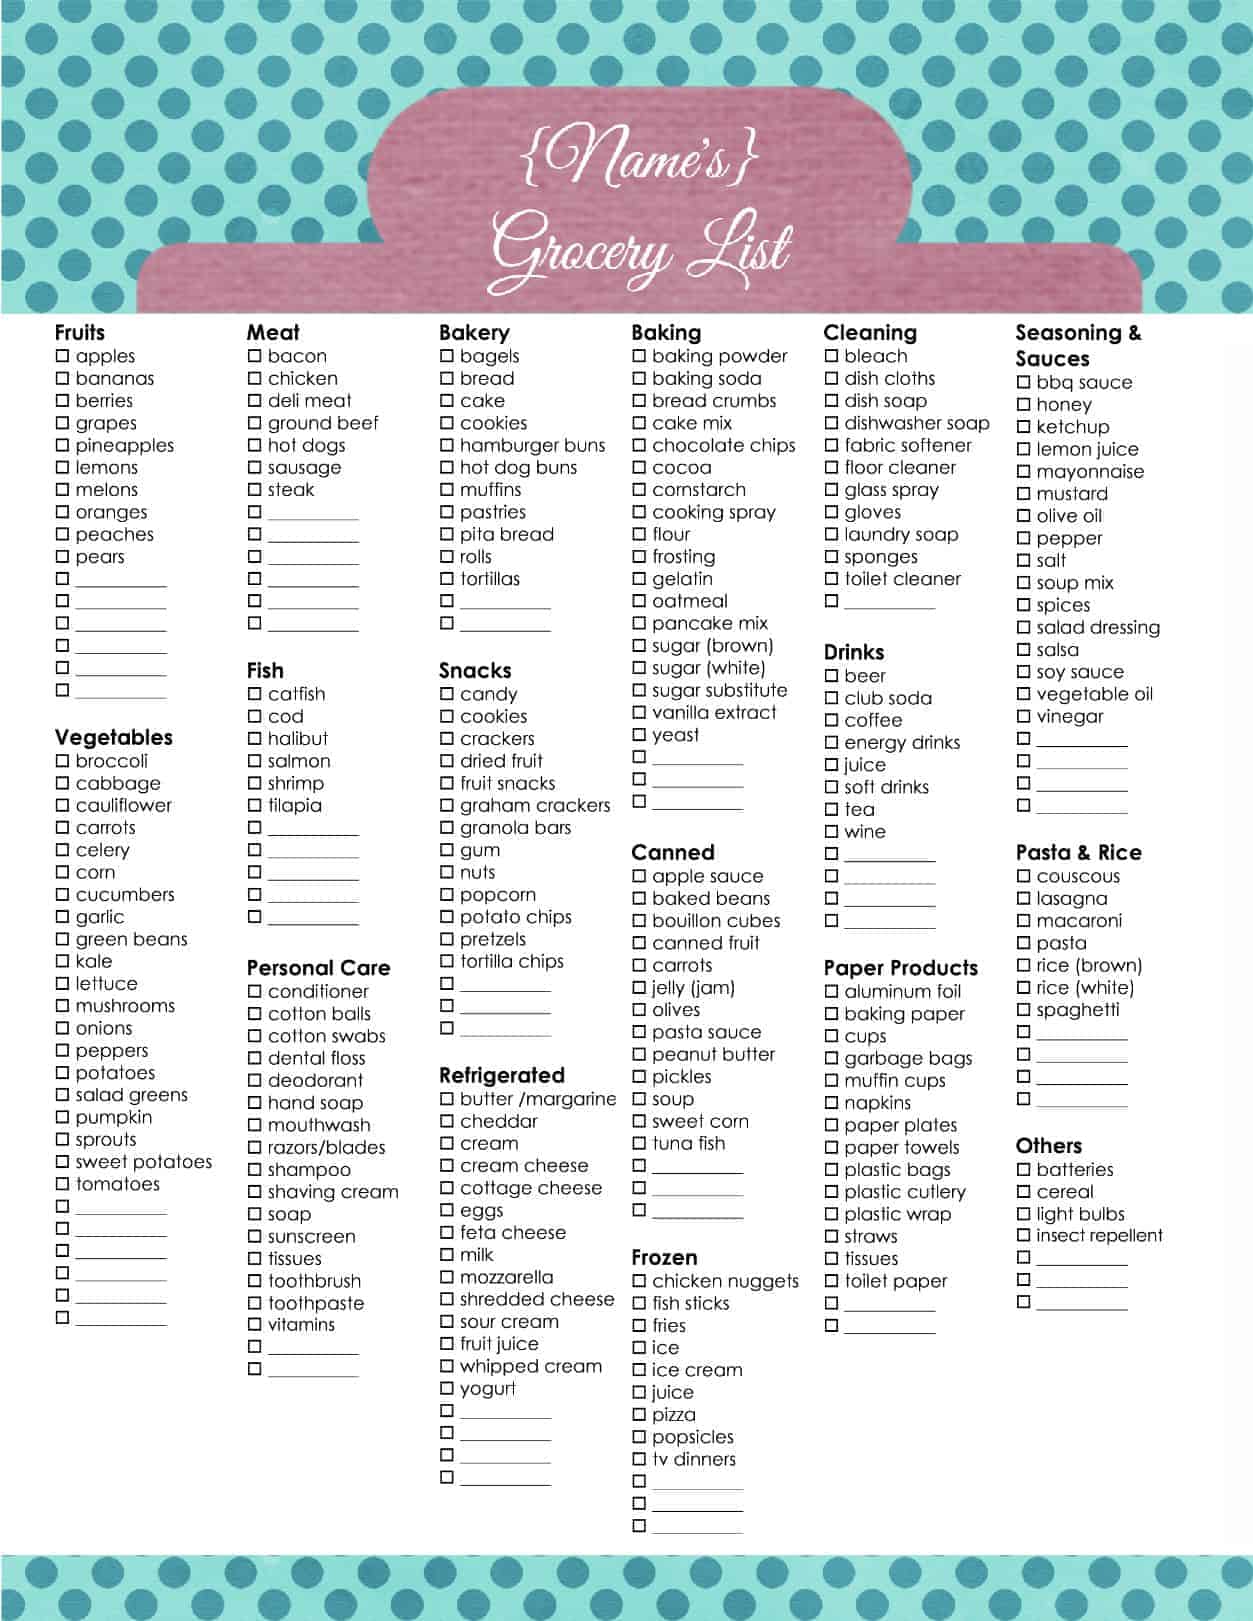 28-simple-grocery-shopping-list-png-sample-shop-design